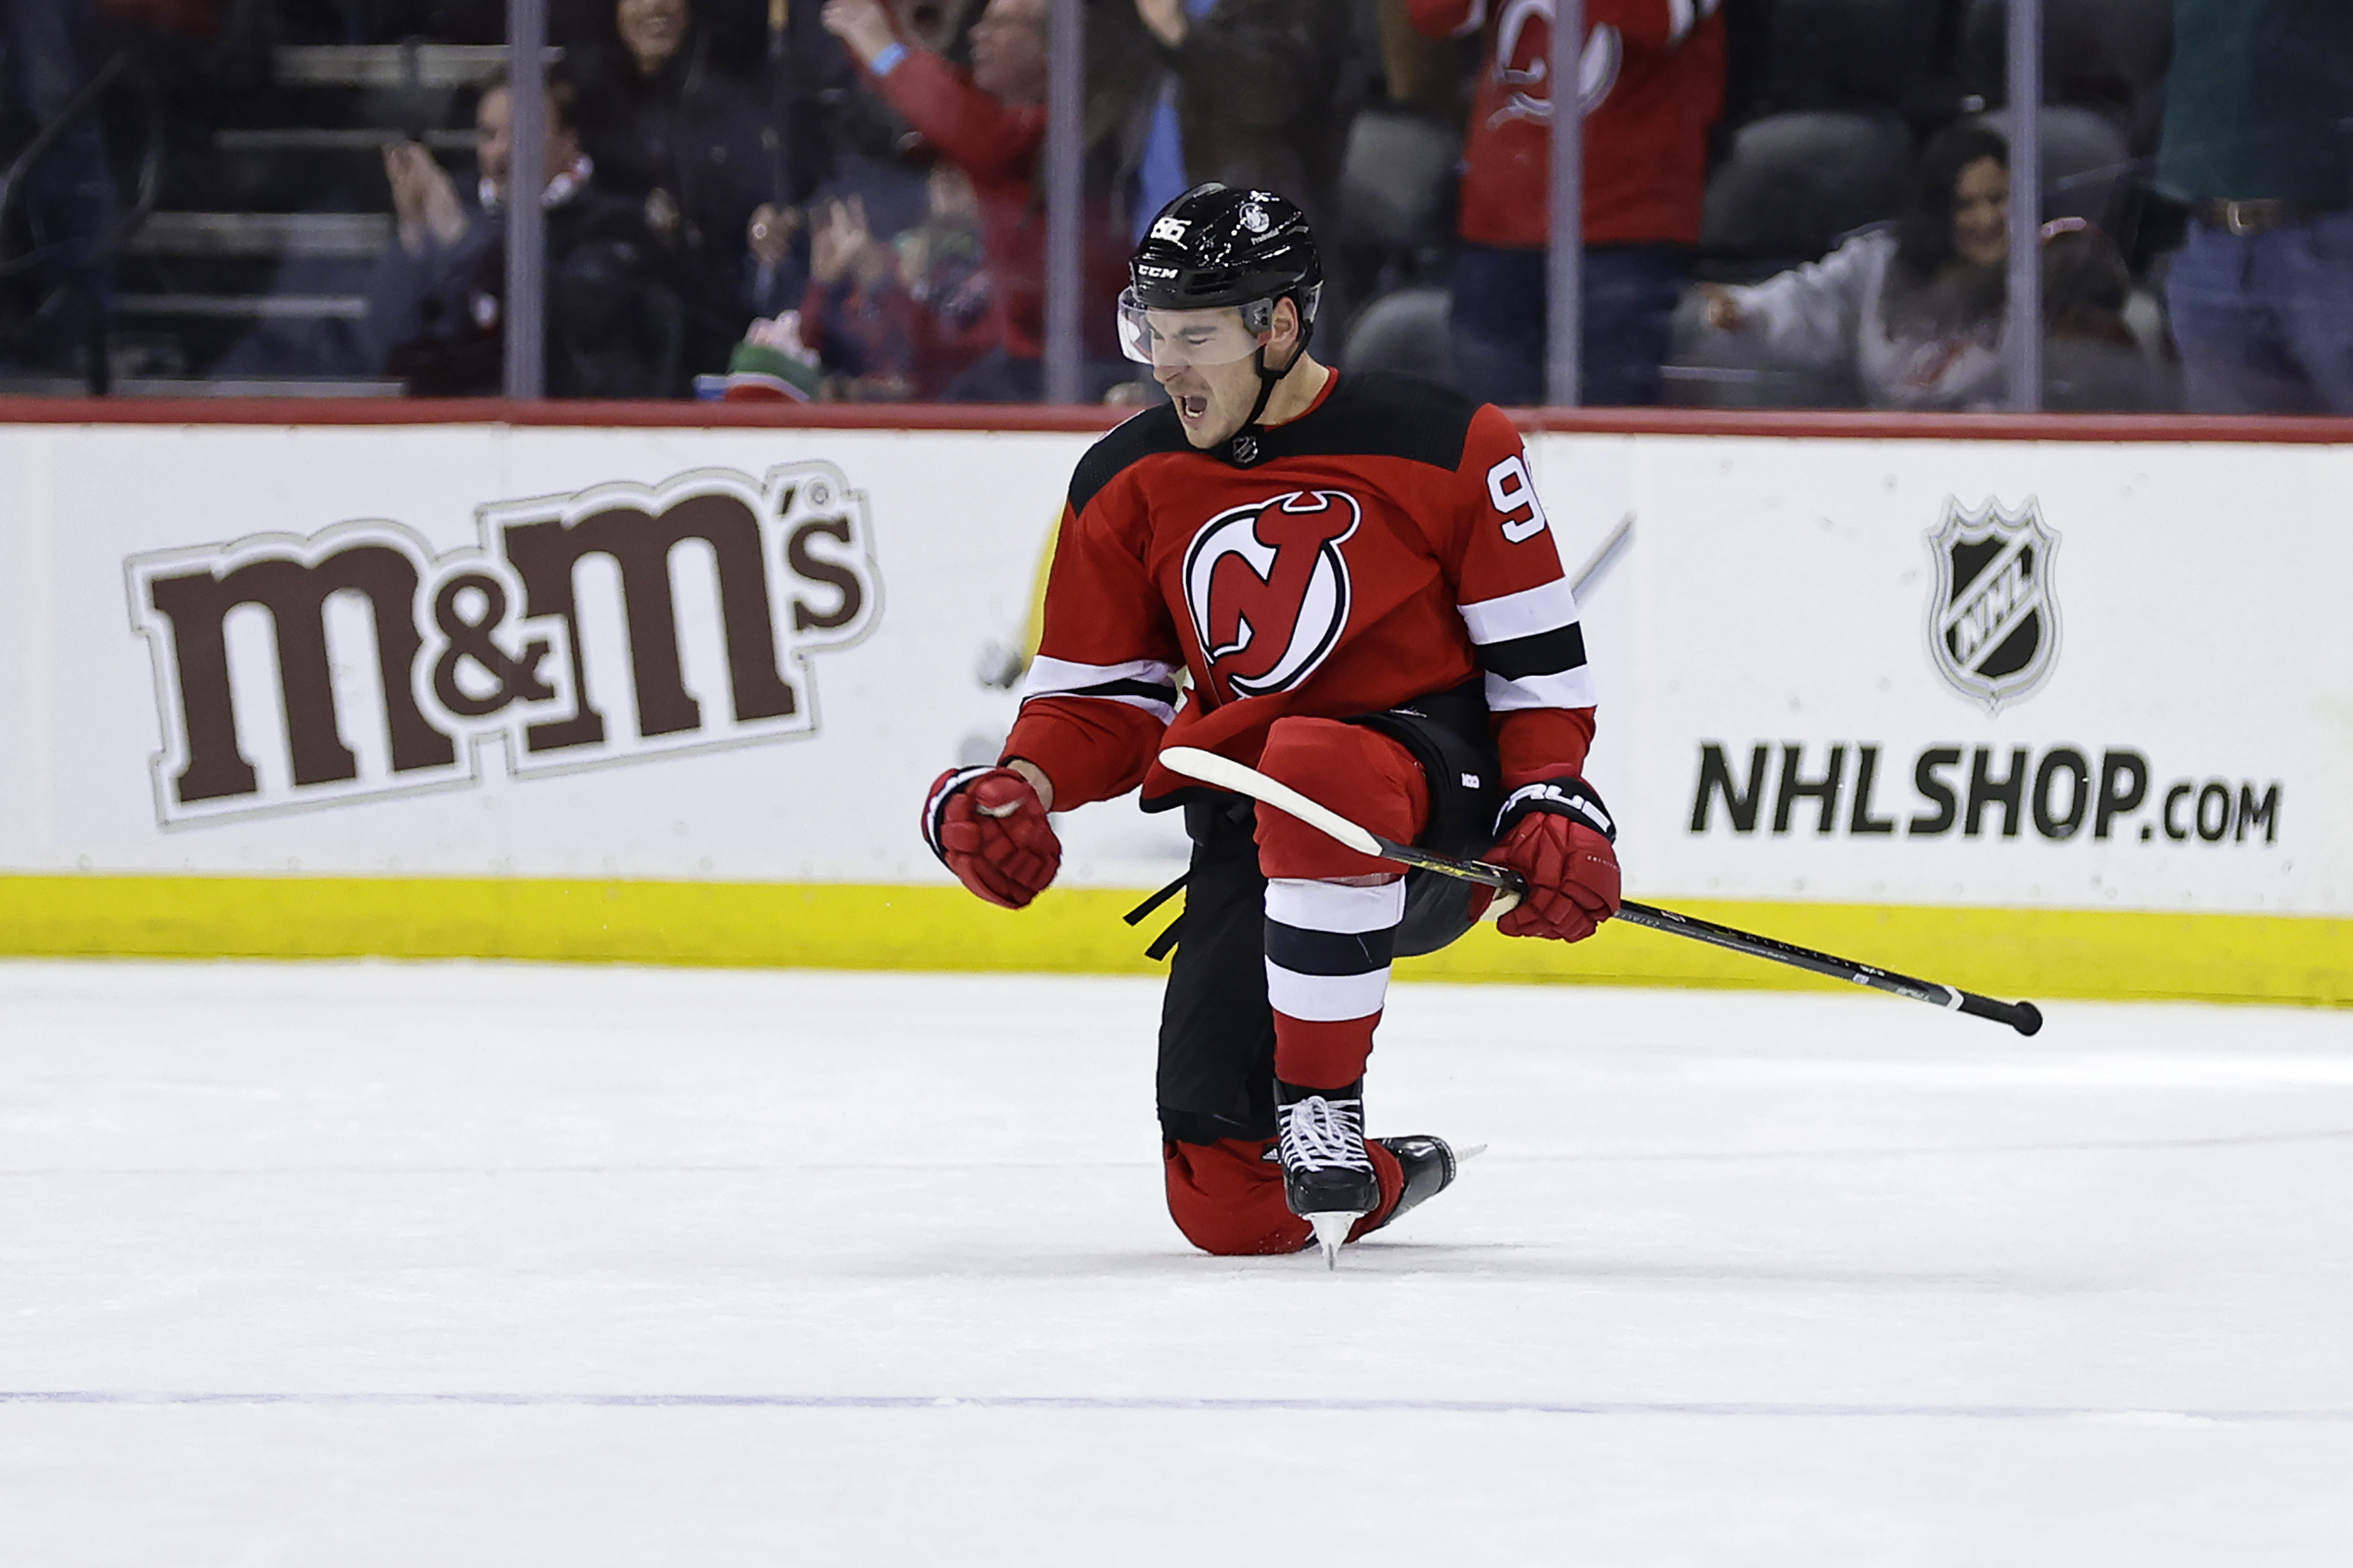 The NJ devils: Even non-hockey-fans love this Cinderella story